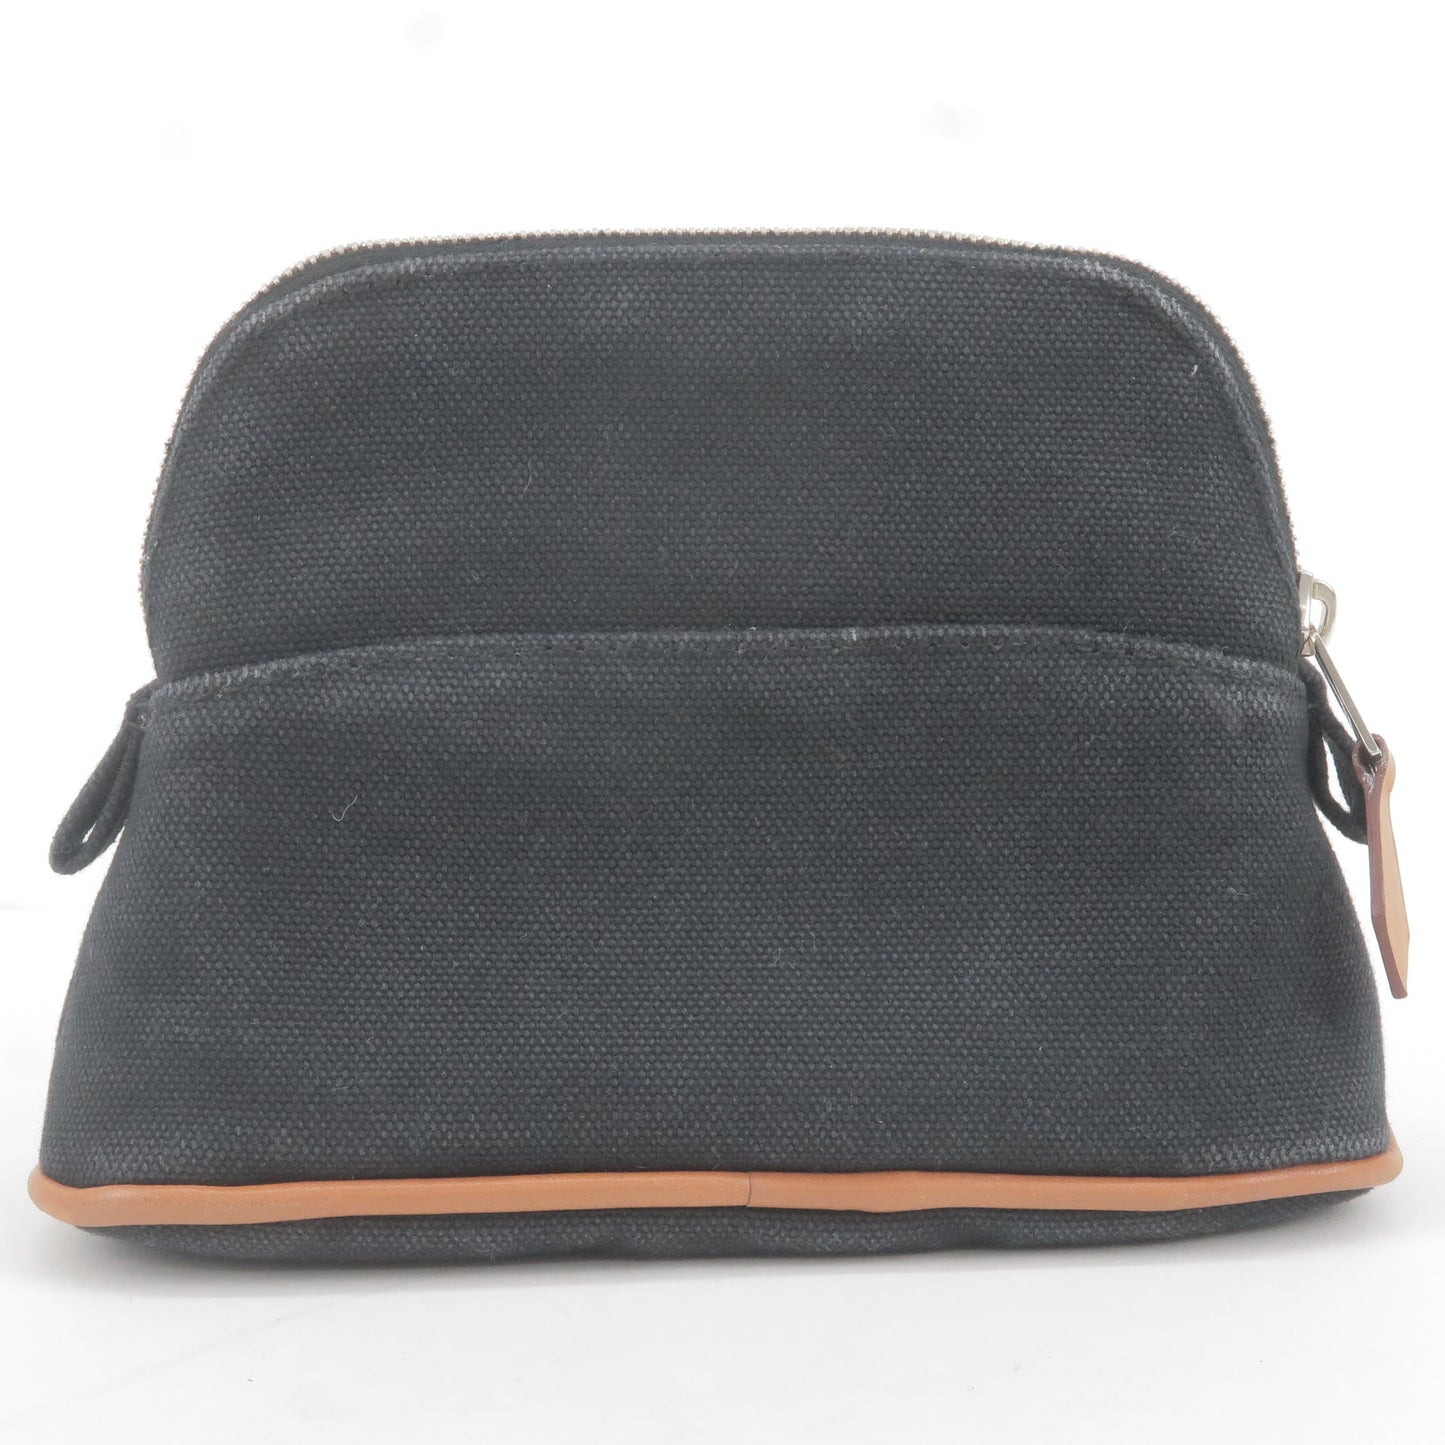 HERMES Bolide Pouch Canvas Leather Mini Cosmetics Bag Black